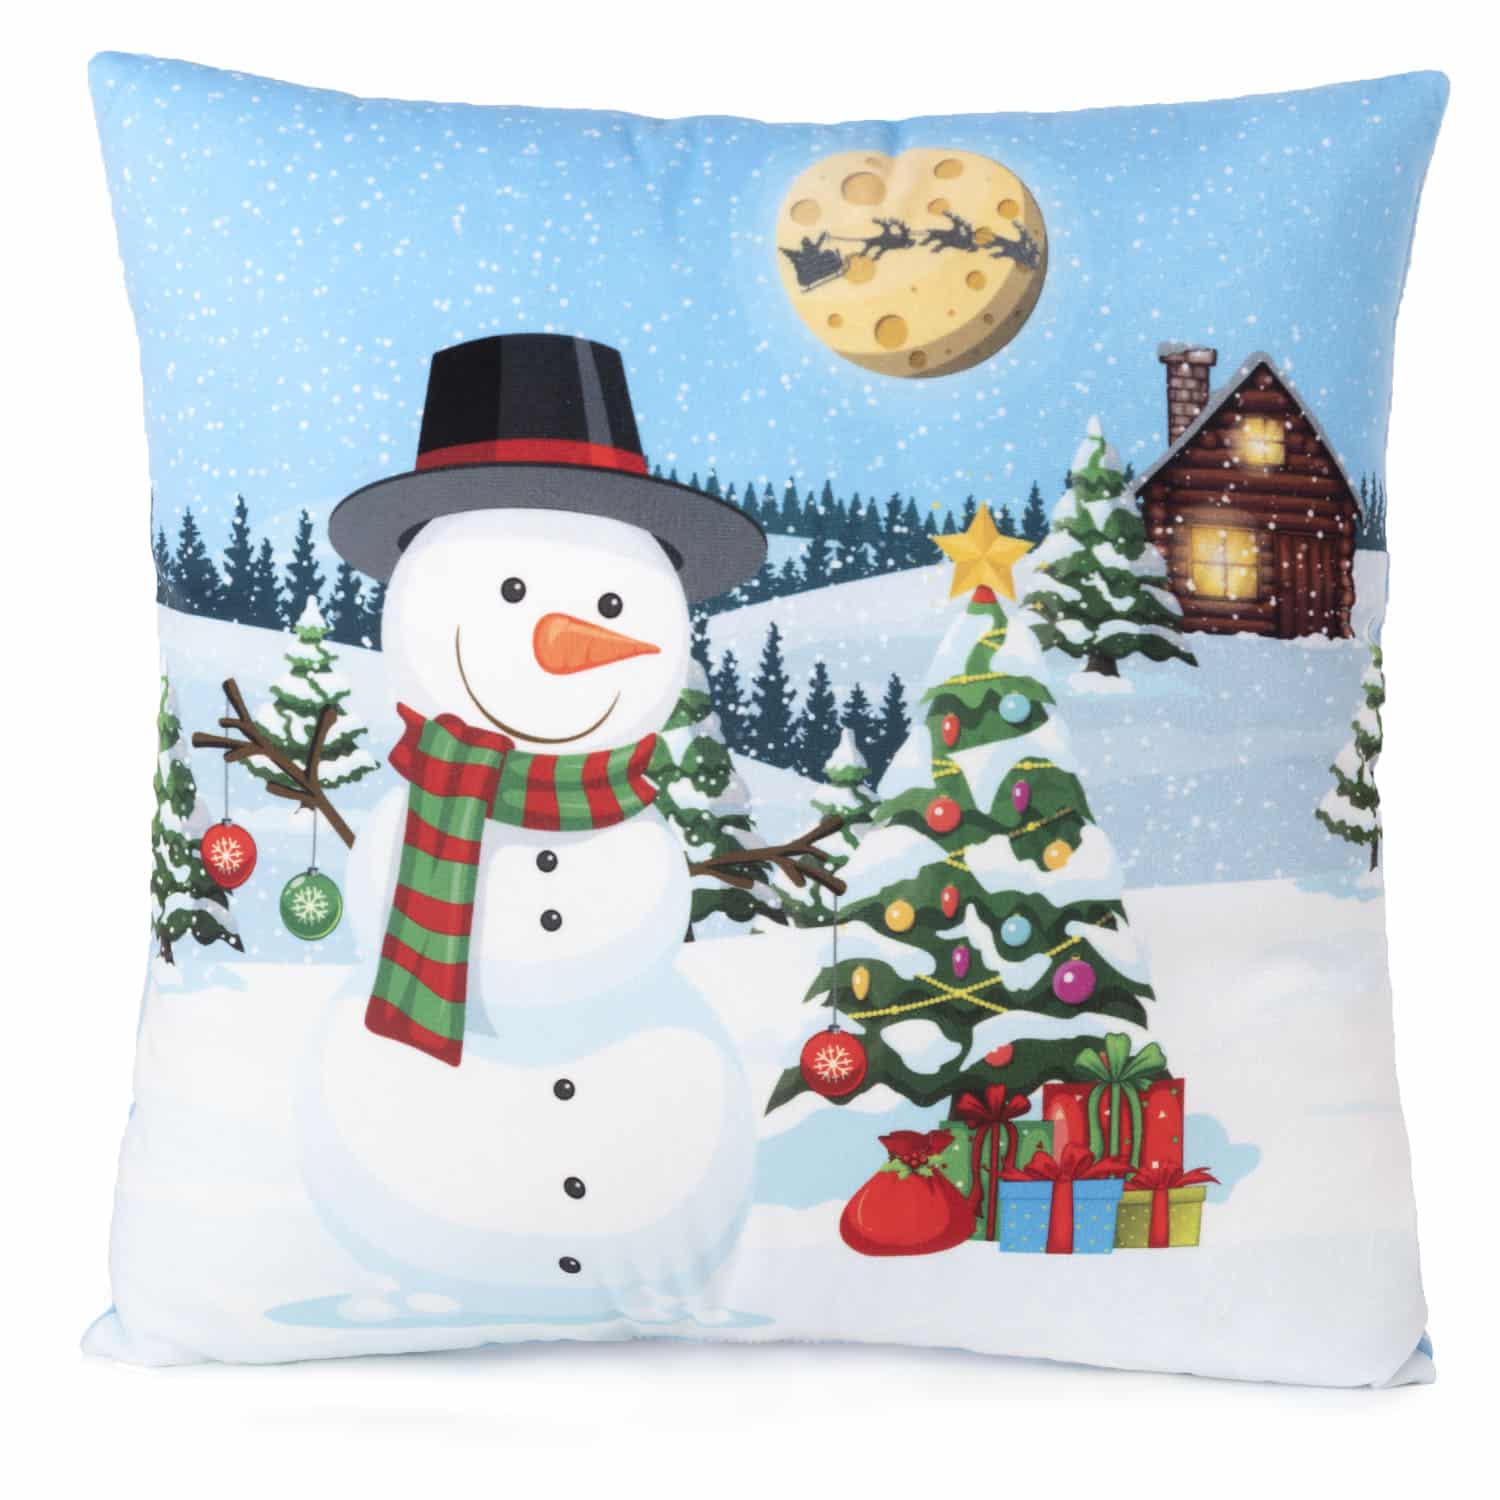 Christmas pillow with Snowman